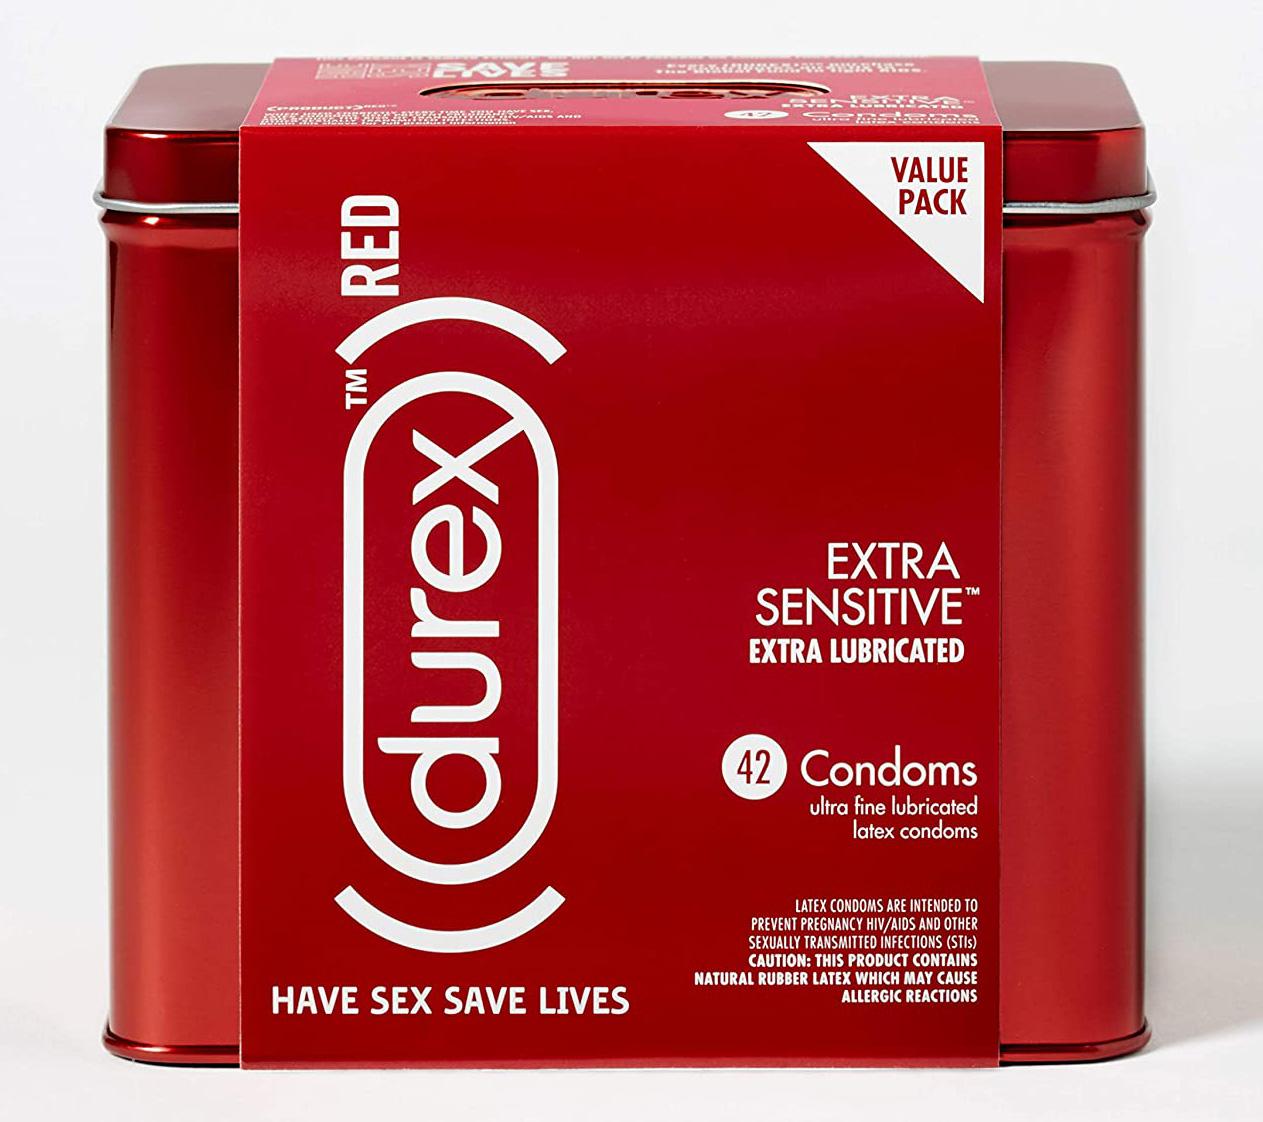 42 Durex RED Extra Sensitive Latex Condoms for $10.07 Shipped